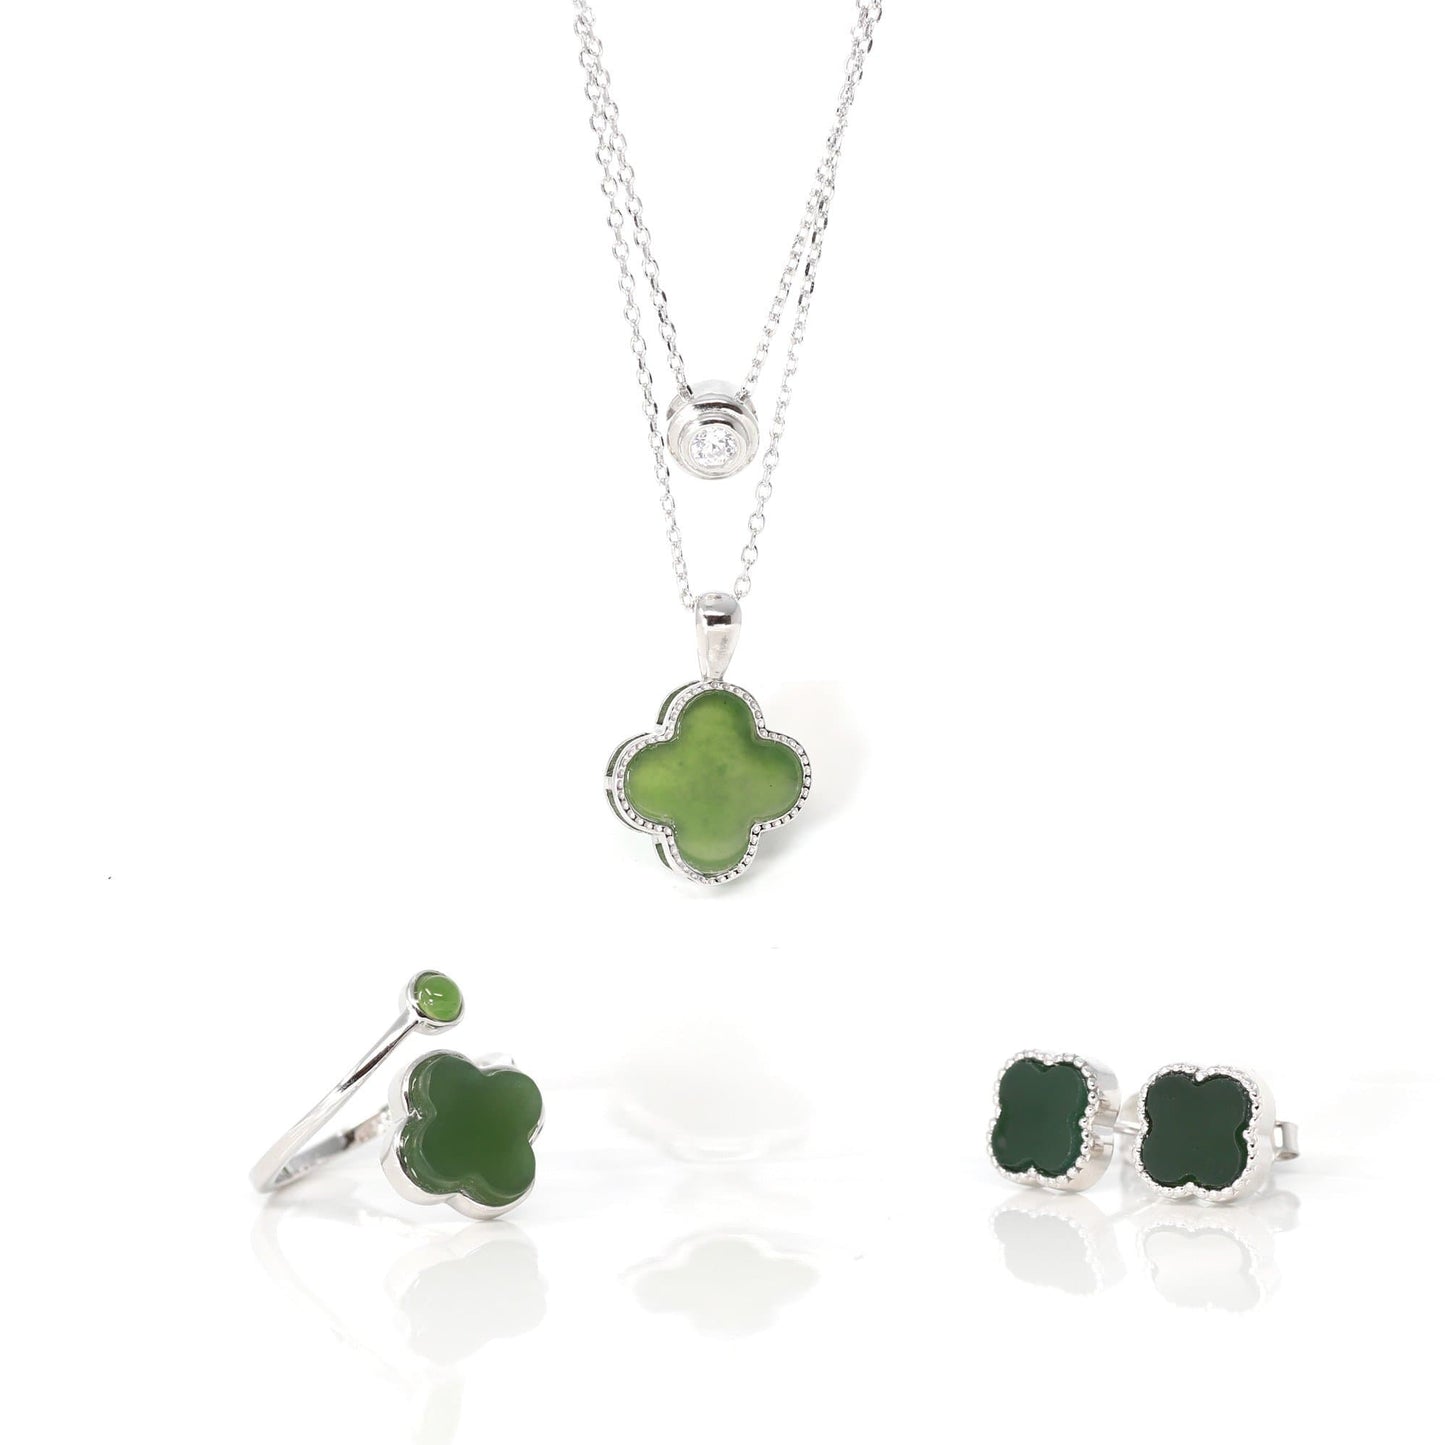 RealJade® "Lucky Four Leaf Clover" Sterling Silver Real Green Nephrite Jade Earrings